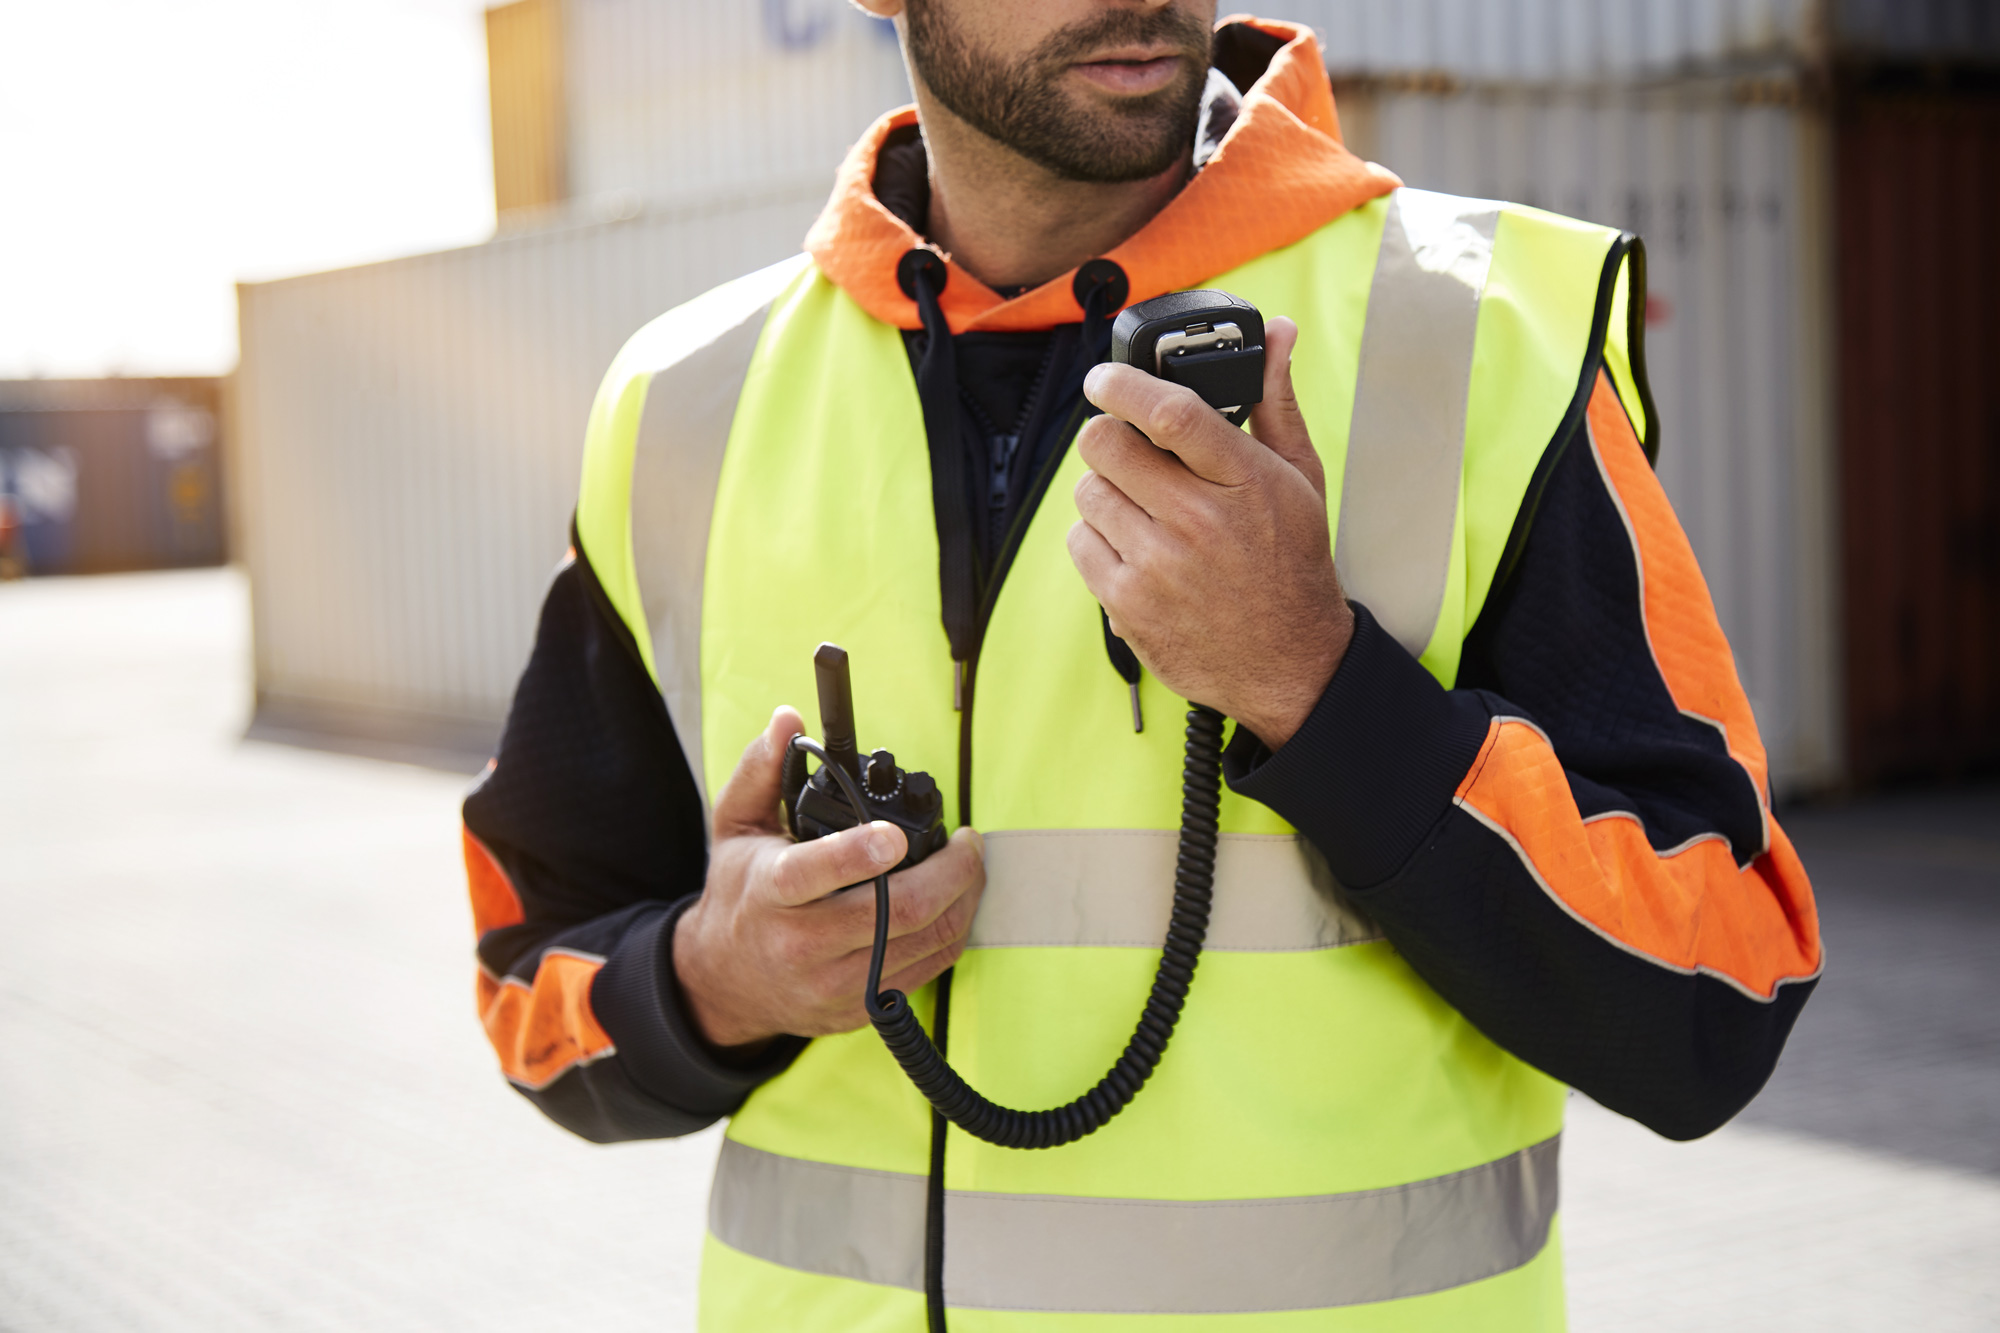 Six vital considerations for investing in two-way radios